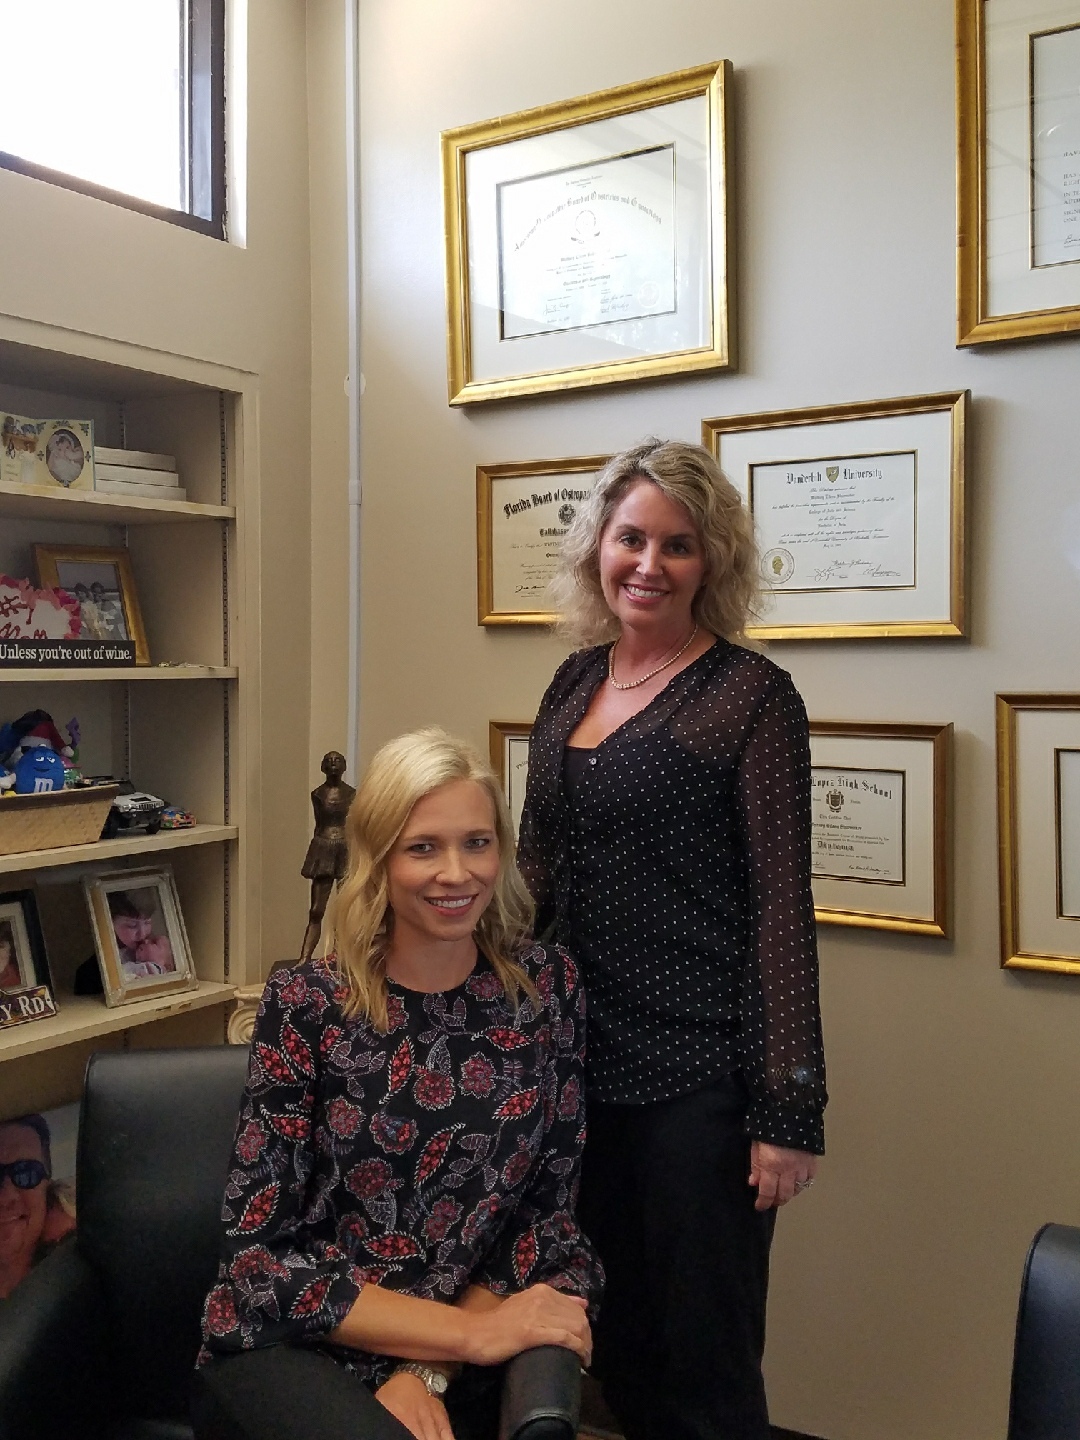 Kelli Marchewka, P.A.-C, seated, recently joined Dr. Whitney Shoemaker at The Gynecology Center in Ormond Beach. Courtesy photo